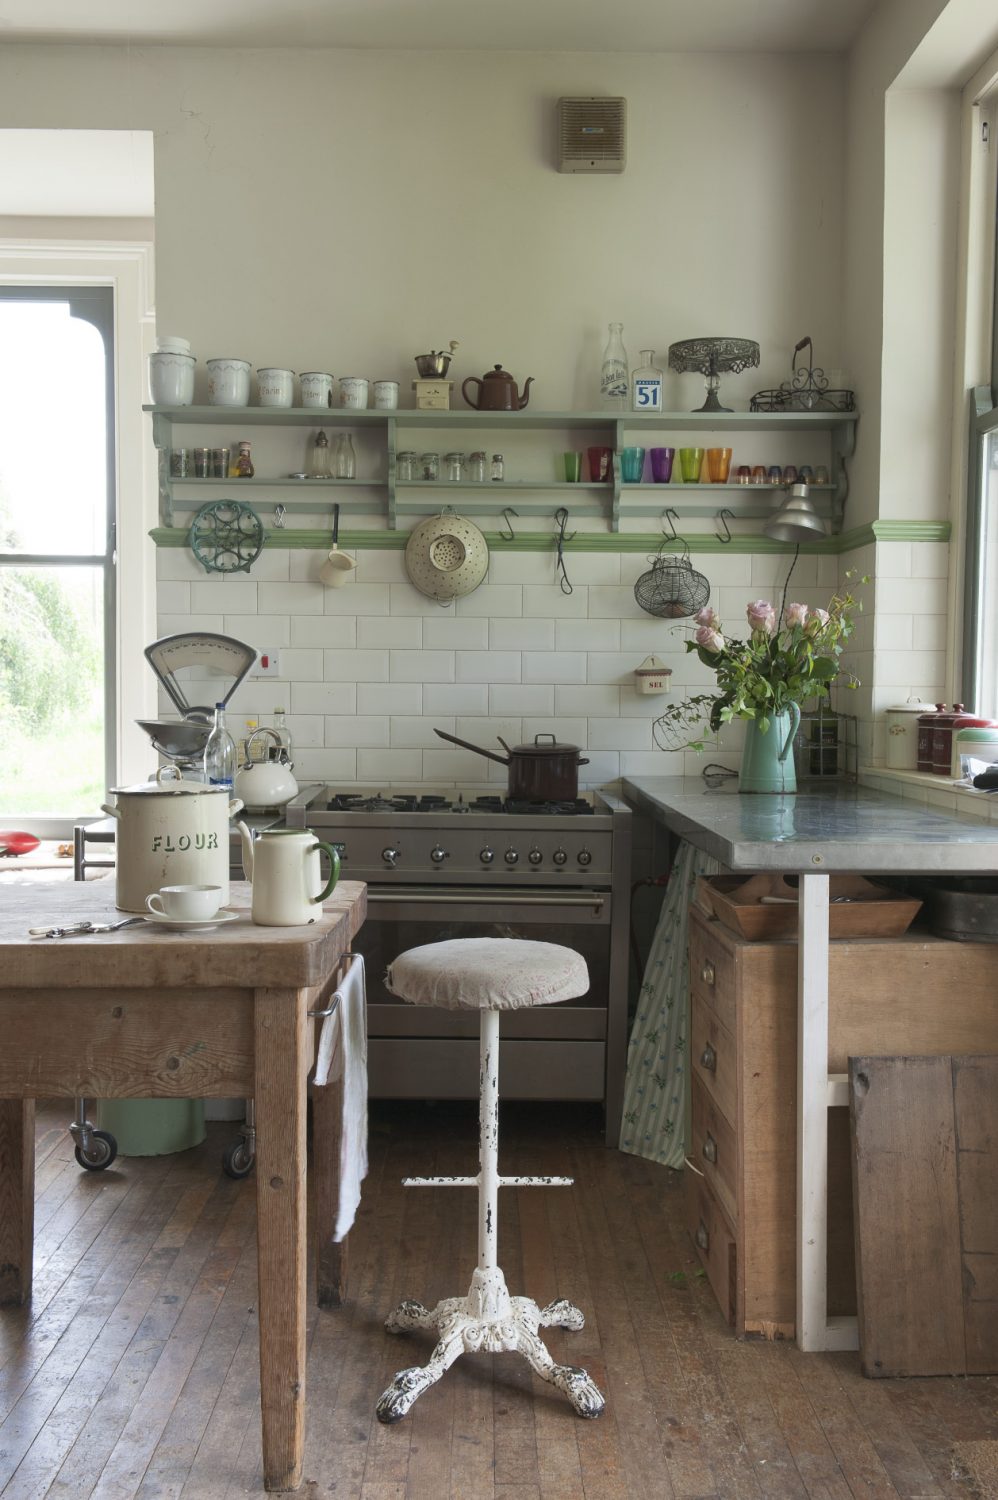 The kitchen is equipped with an assortment of tables and trolleys with under-sink and work surface spaces covered with curtains of cheerful, printed fabrics